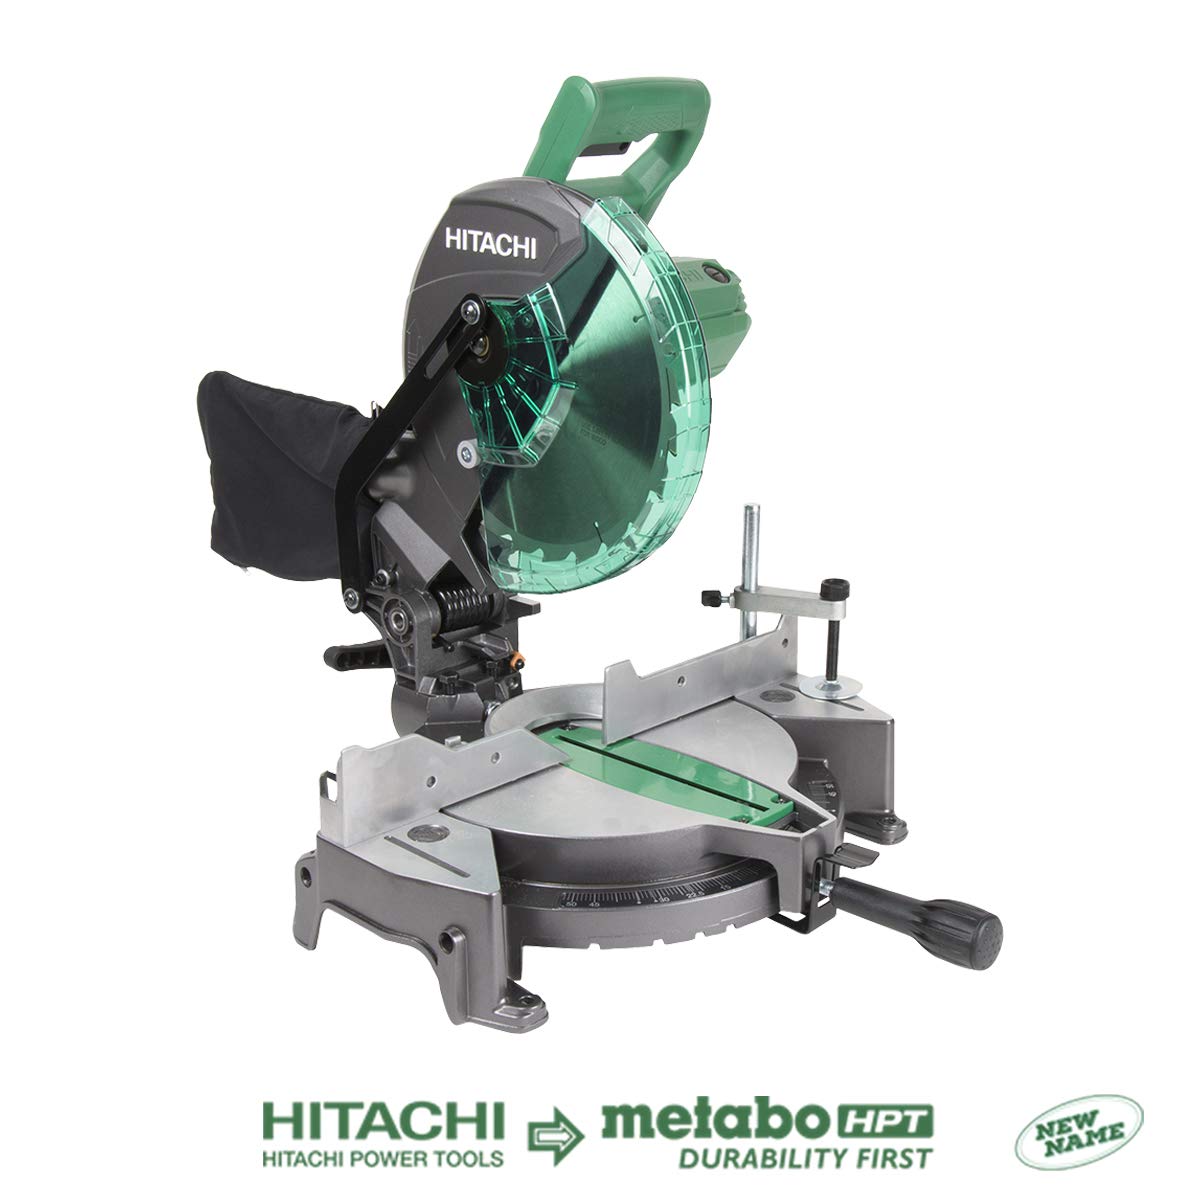 Metabo HPT C10FCGS 10-inch Compound Miter Saw  